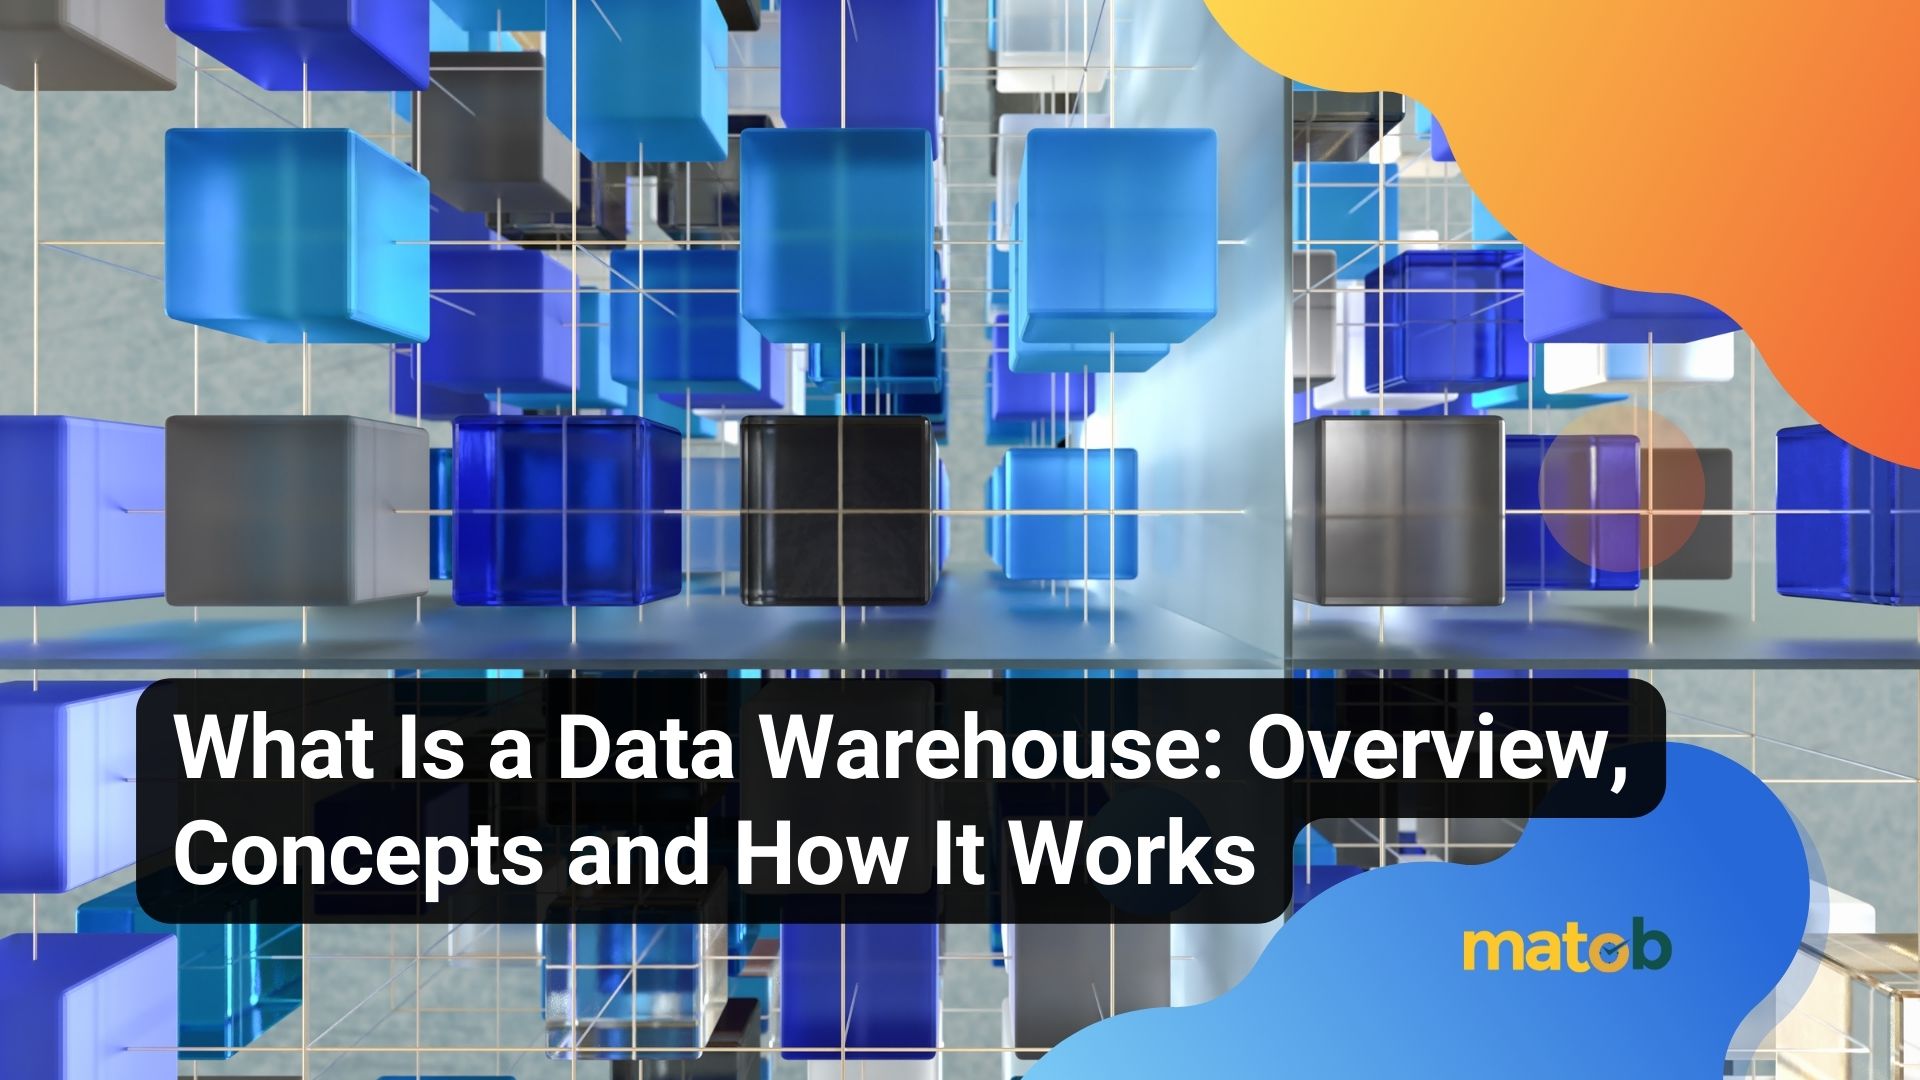 What Is a Data Warehouse: Overview, Concepts and How It Works